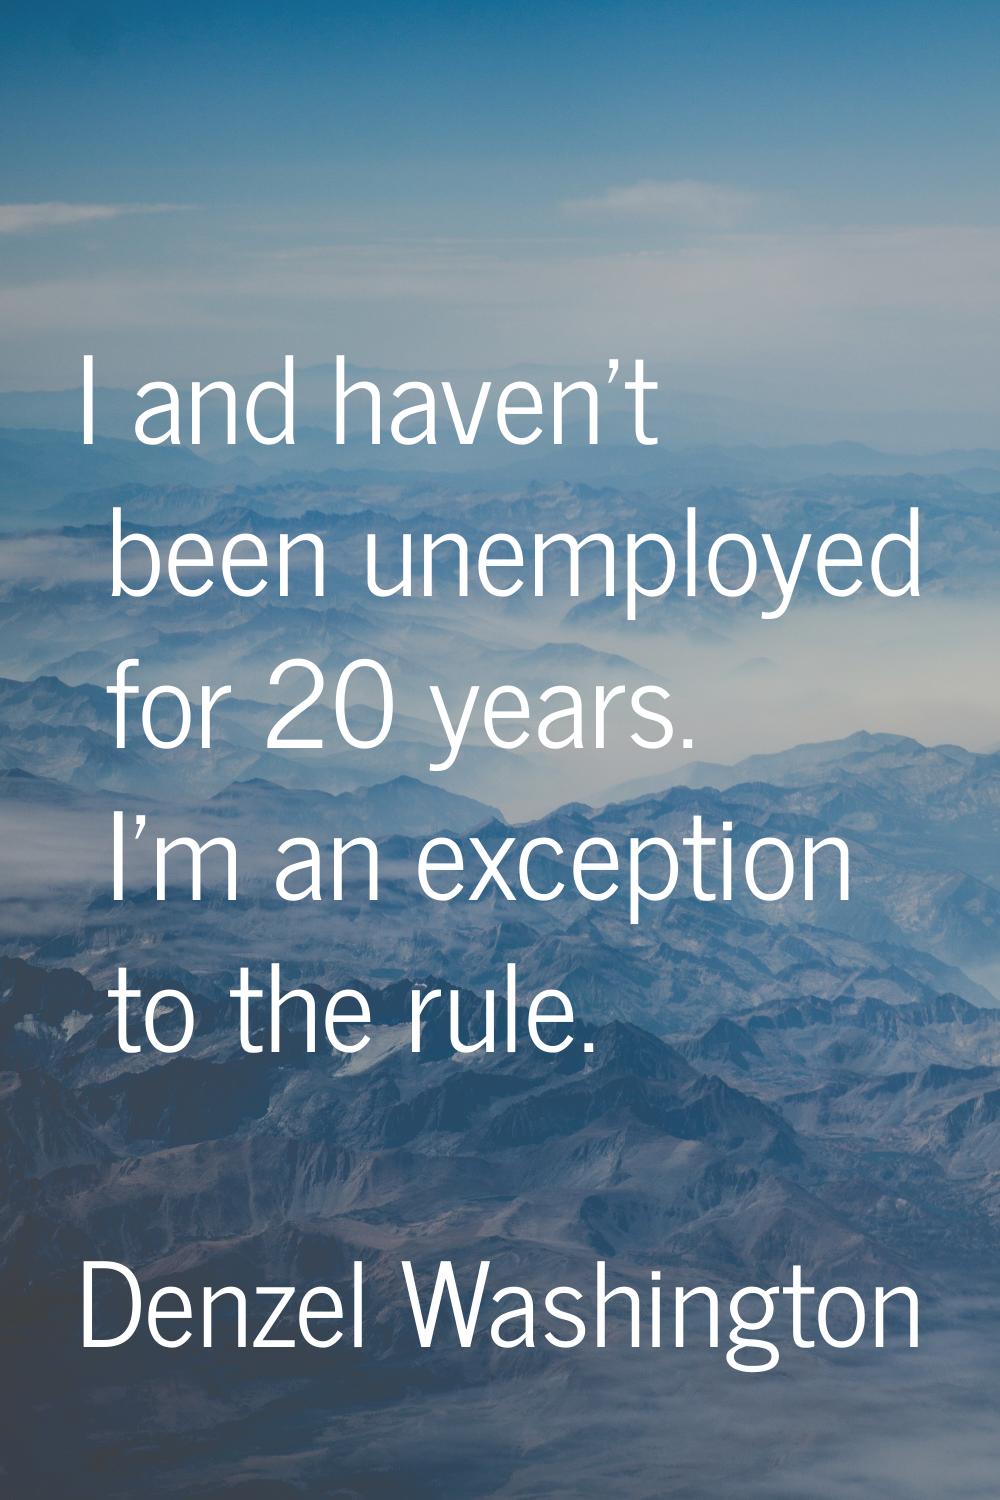 I and haven't been unemployed for 20 years. I'm an exception to the rule.